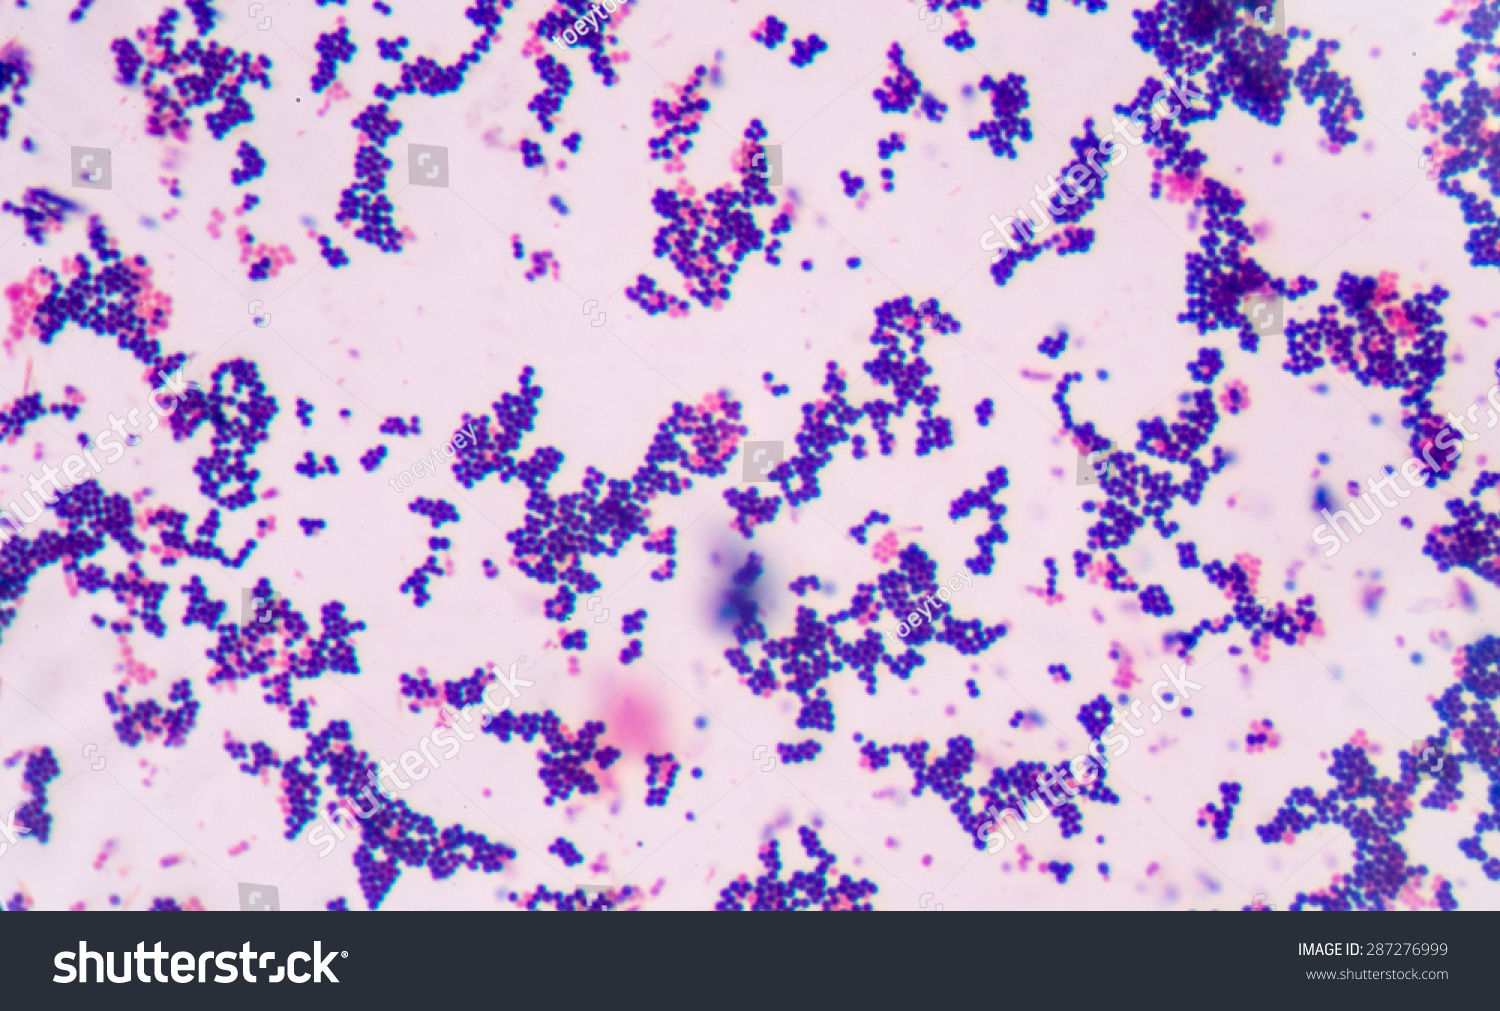 Gram staining, also called Gram's method, is a method of differentiating bacterial species into two large groups (Gram-positive and Gram-negative). #287276999